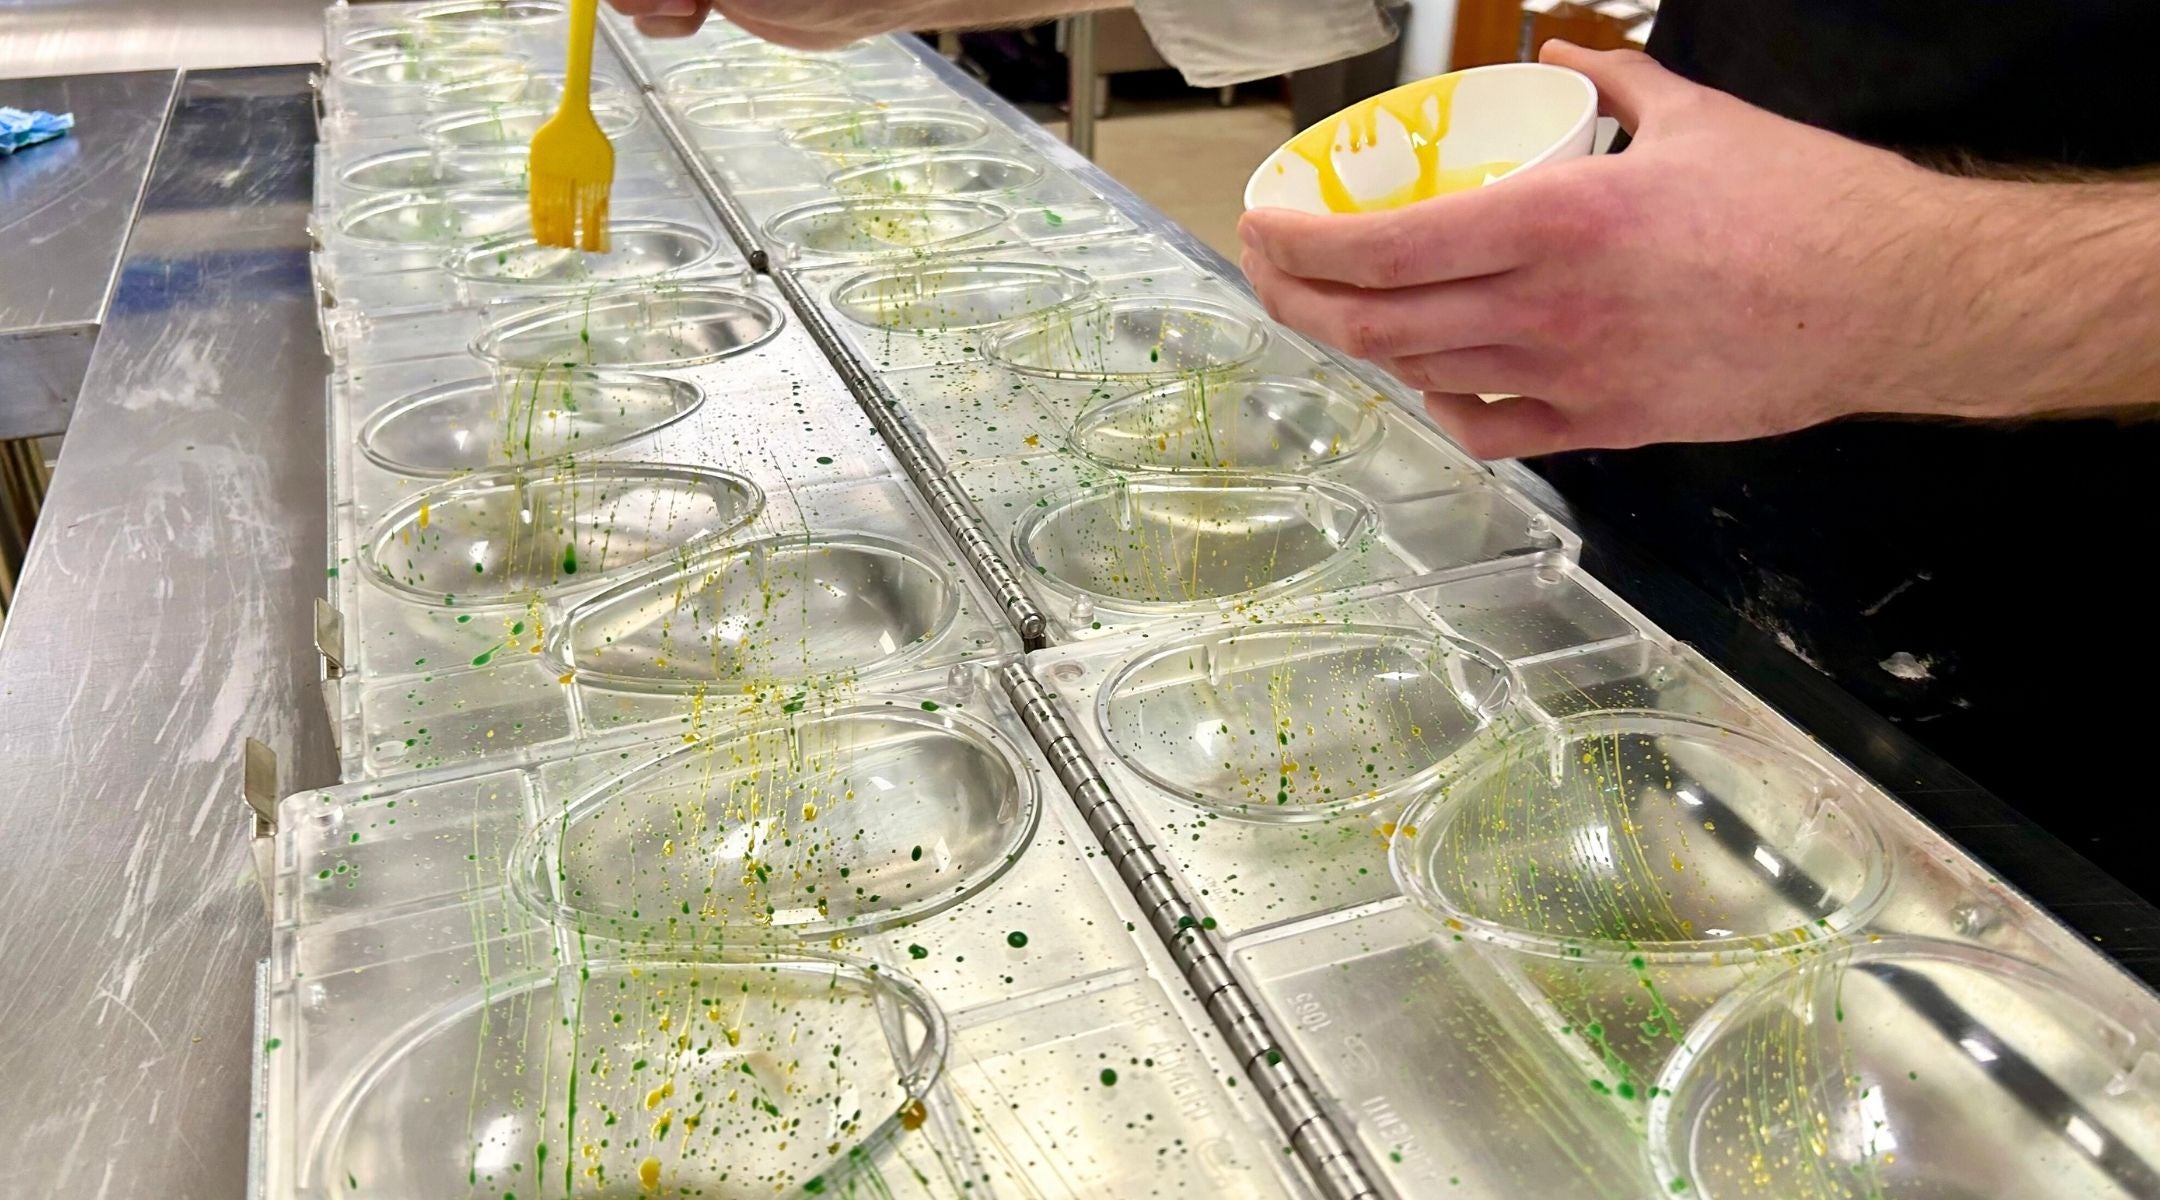 A chocolatier hand-decorating a series of Easter egg moulds with yellow and green cocoa butter speckles and splatter